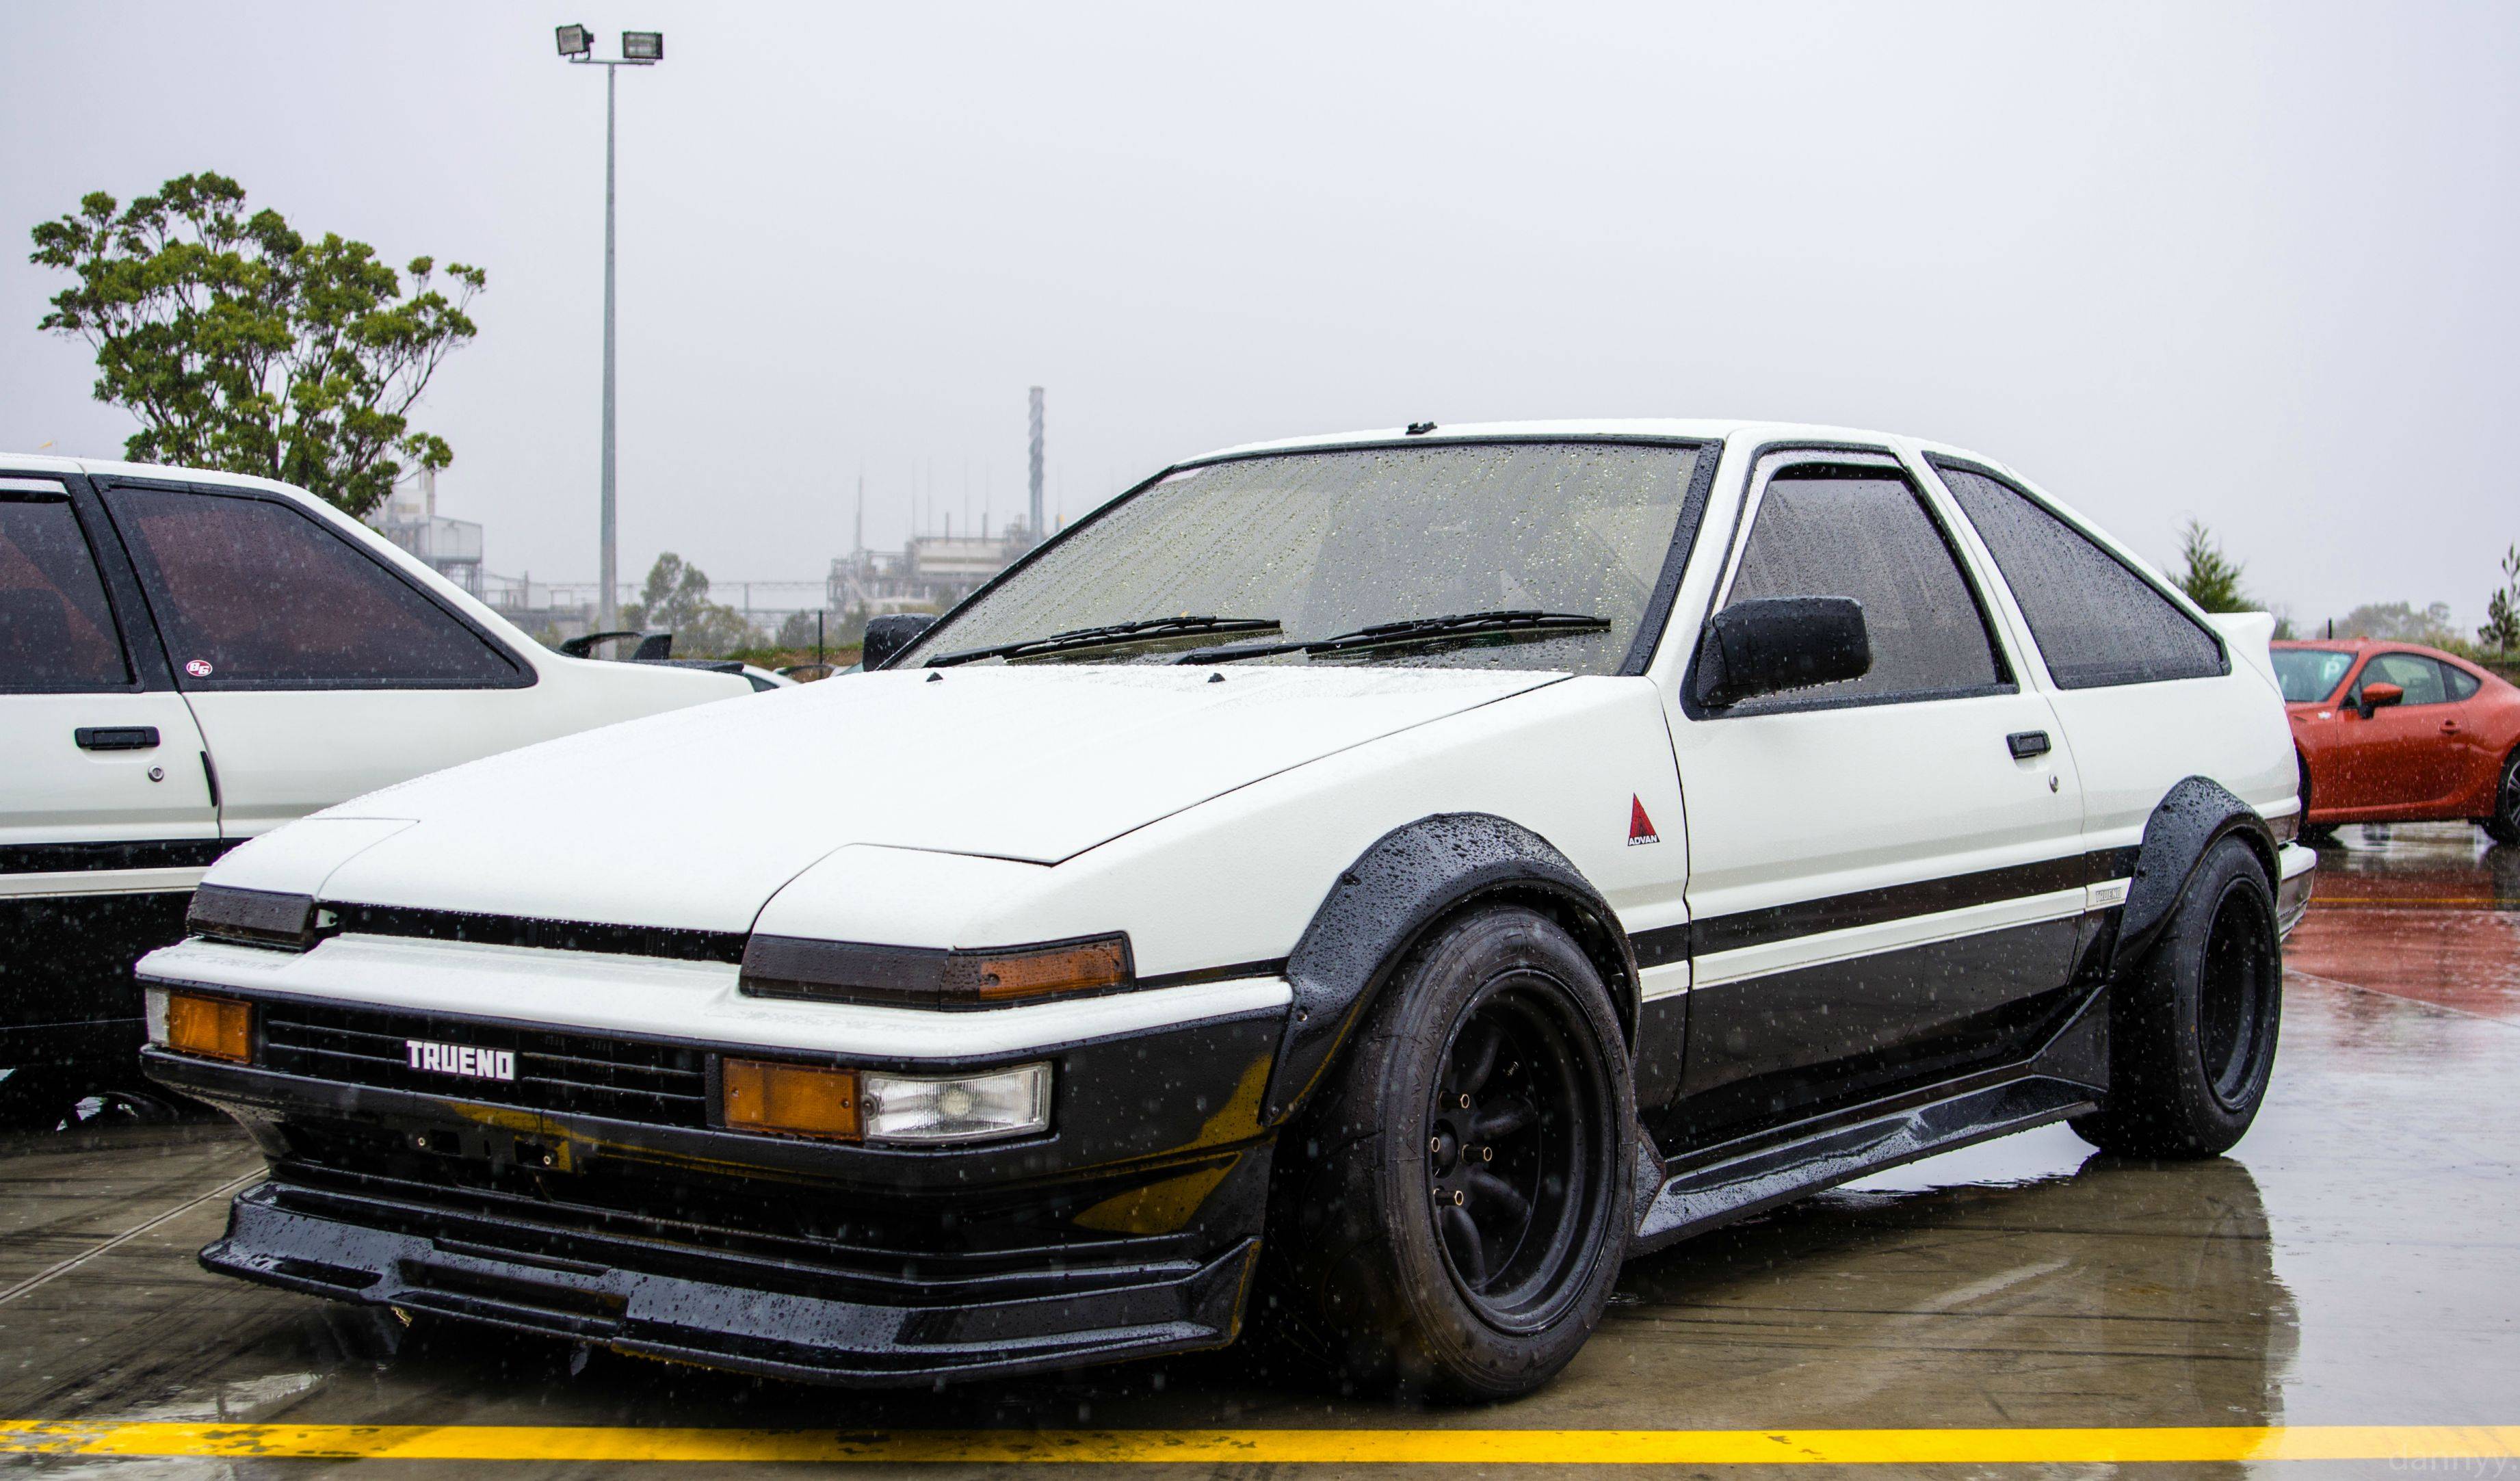 Re Watching Initial D, Had To Re Post: Toyota AE86 Trueno <3